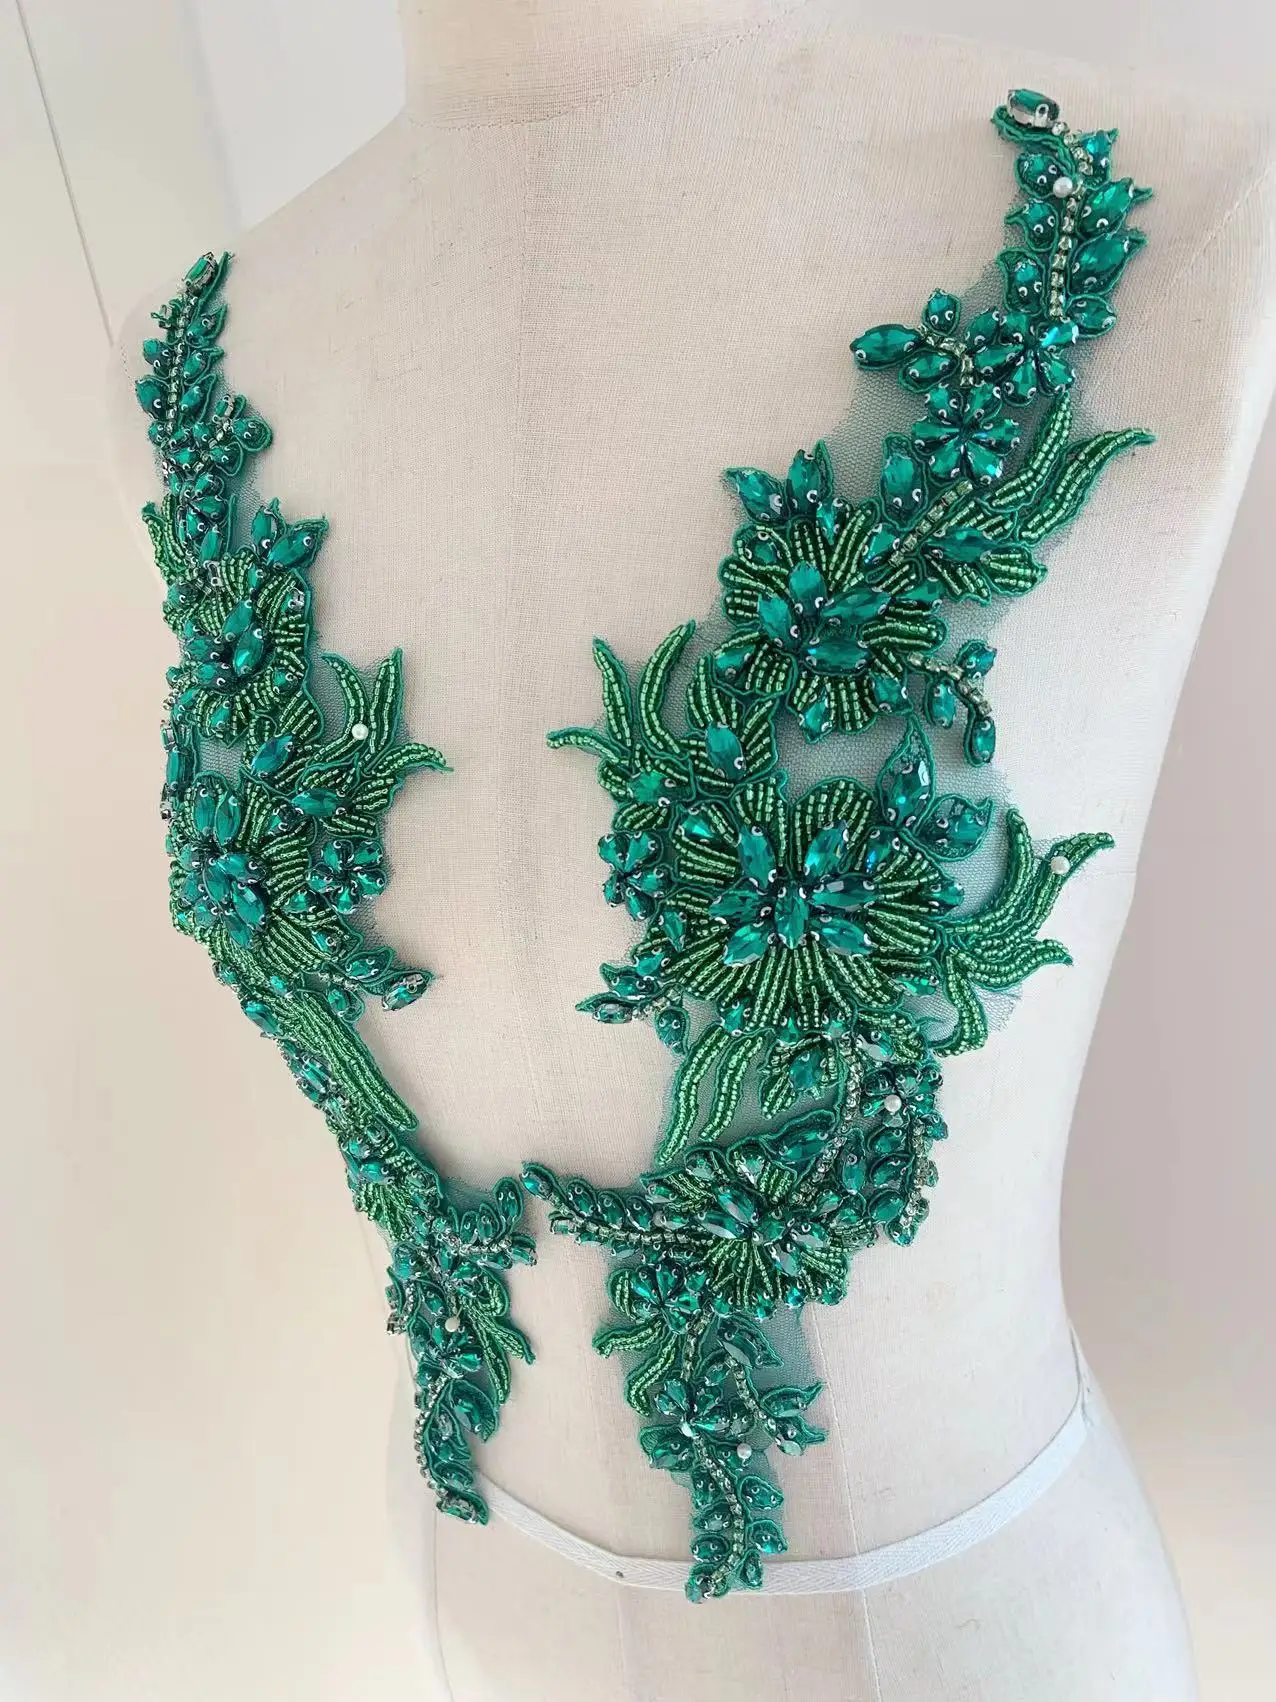 

3D Luxury Green Rhinestone Applique Crystal Bodice Patch Flowers Bead for Couture,Dance Handcrafted,Colorful Bridal Decoration